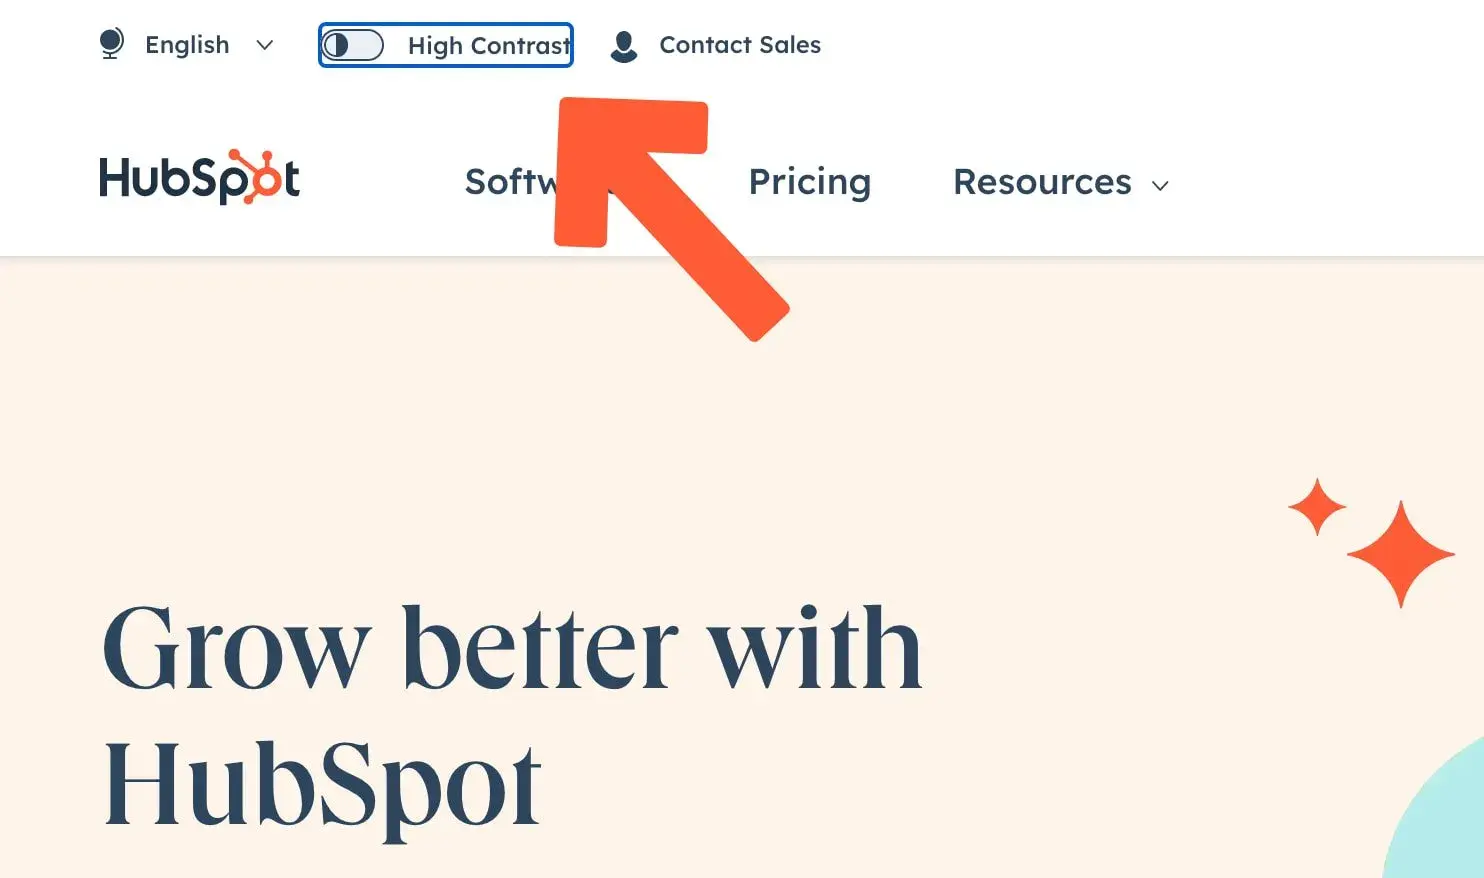 Screenshot of HubSpot website with high contrast accessibility option